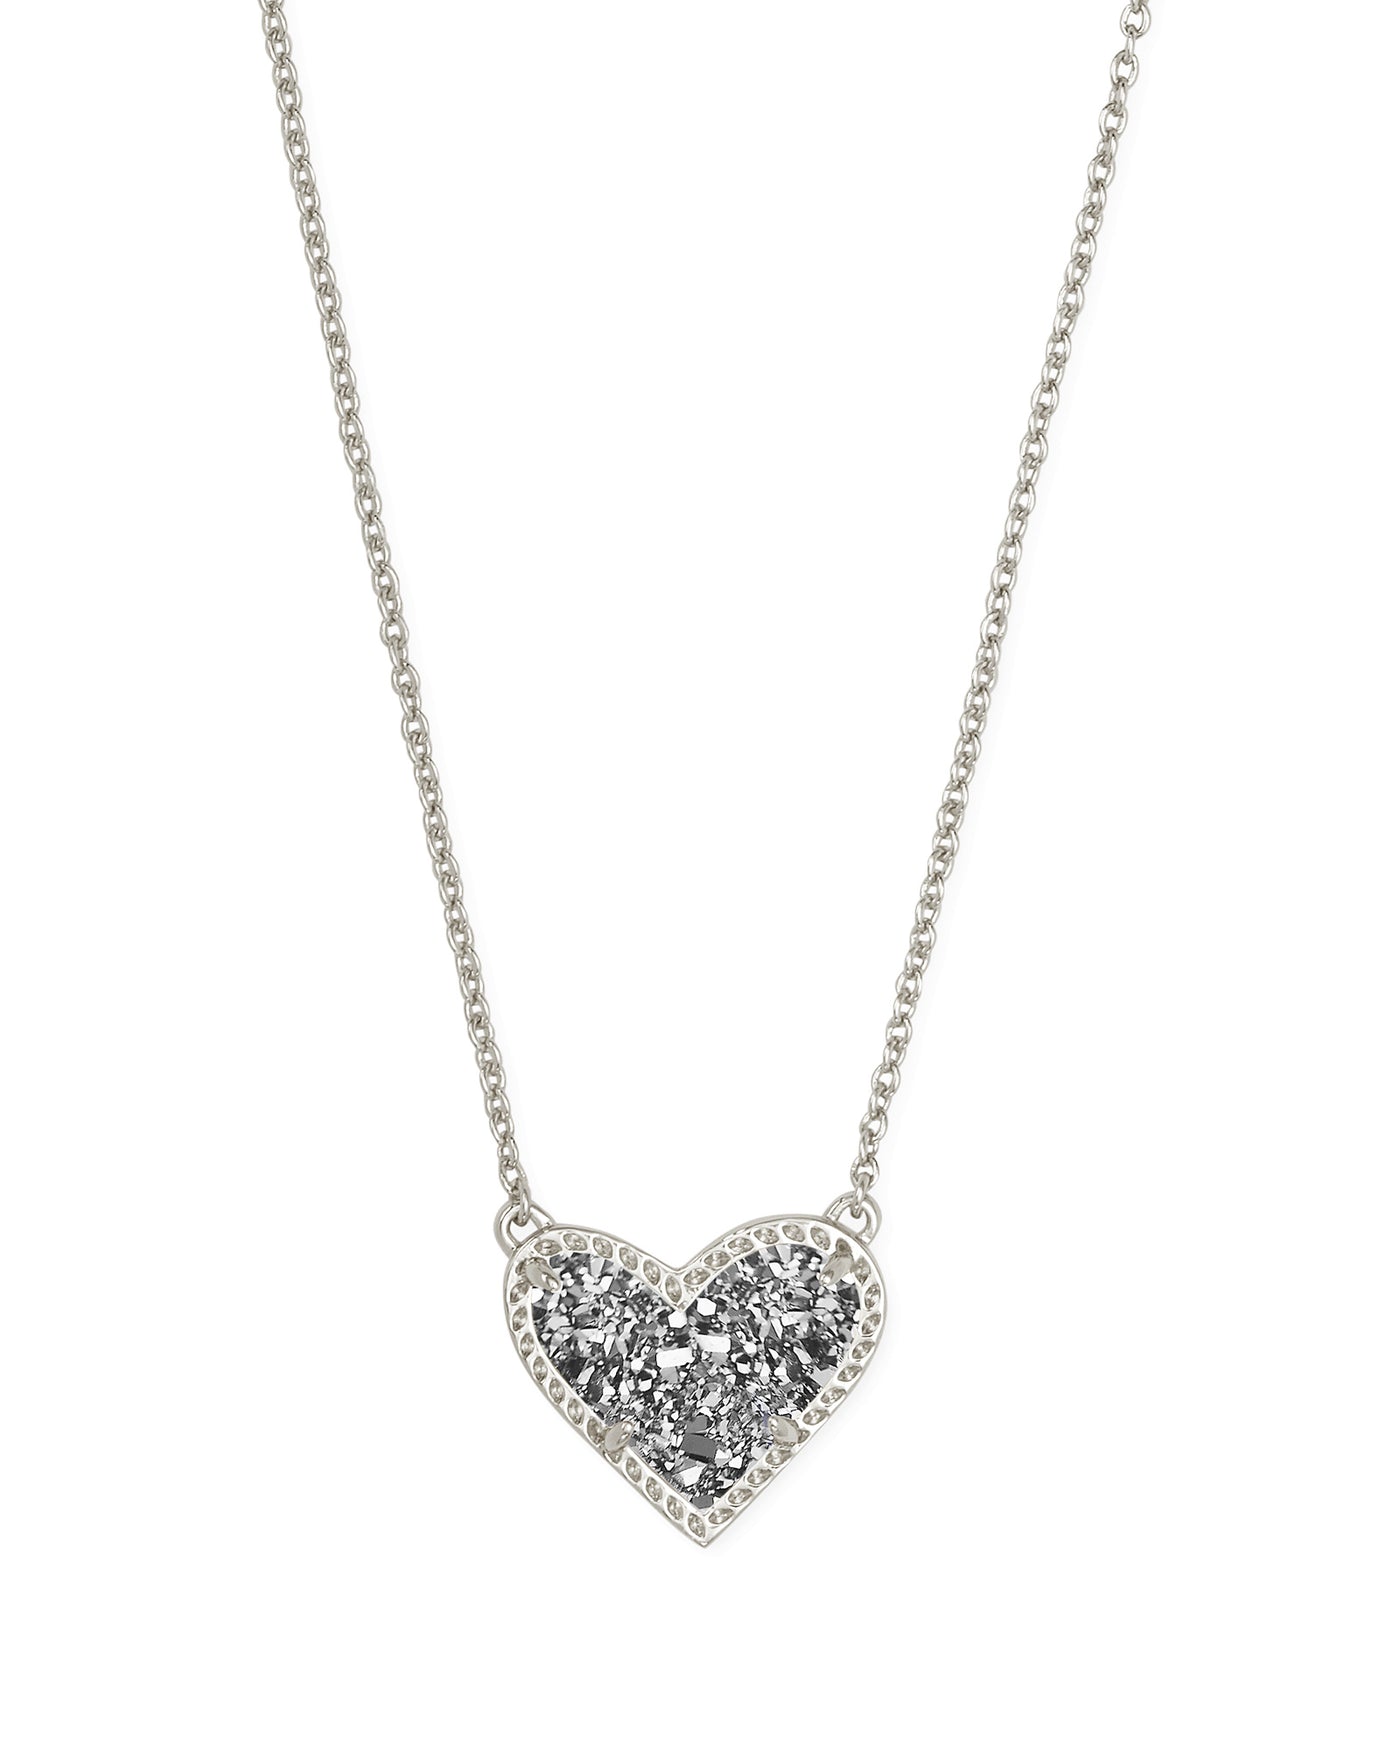 Ari Heart Pendant Necklace Silver Platinum Drusy on white background, front view.